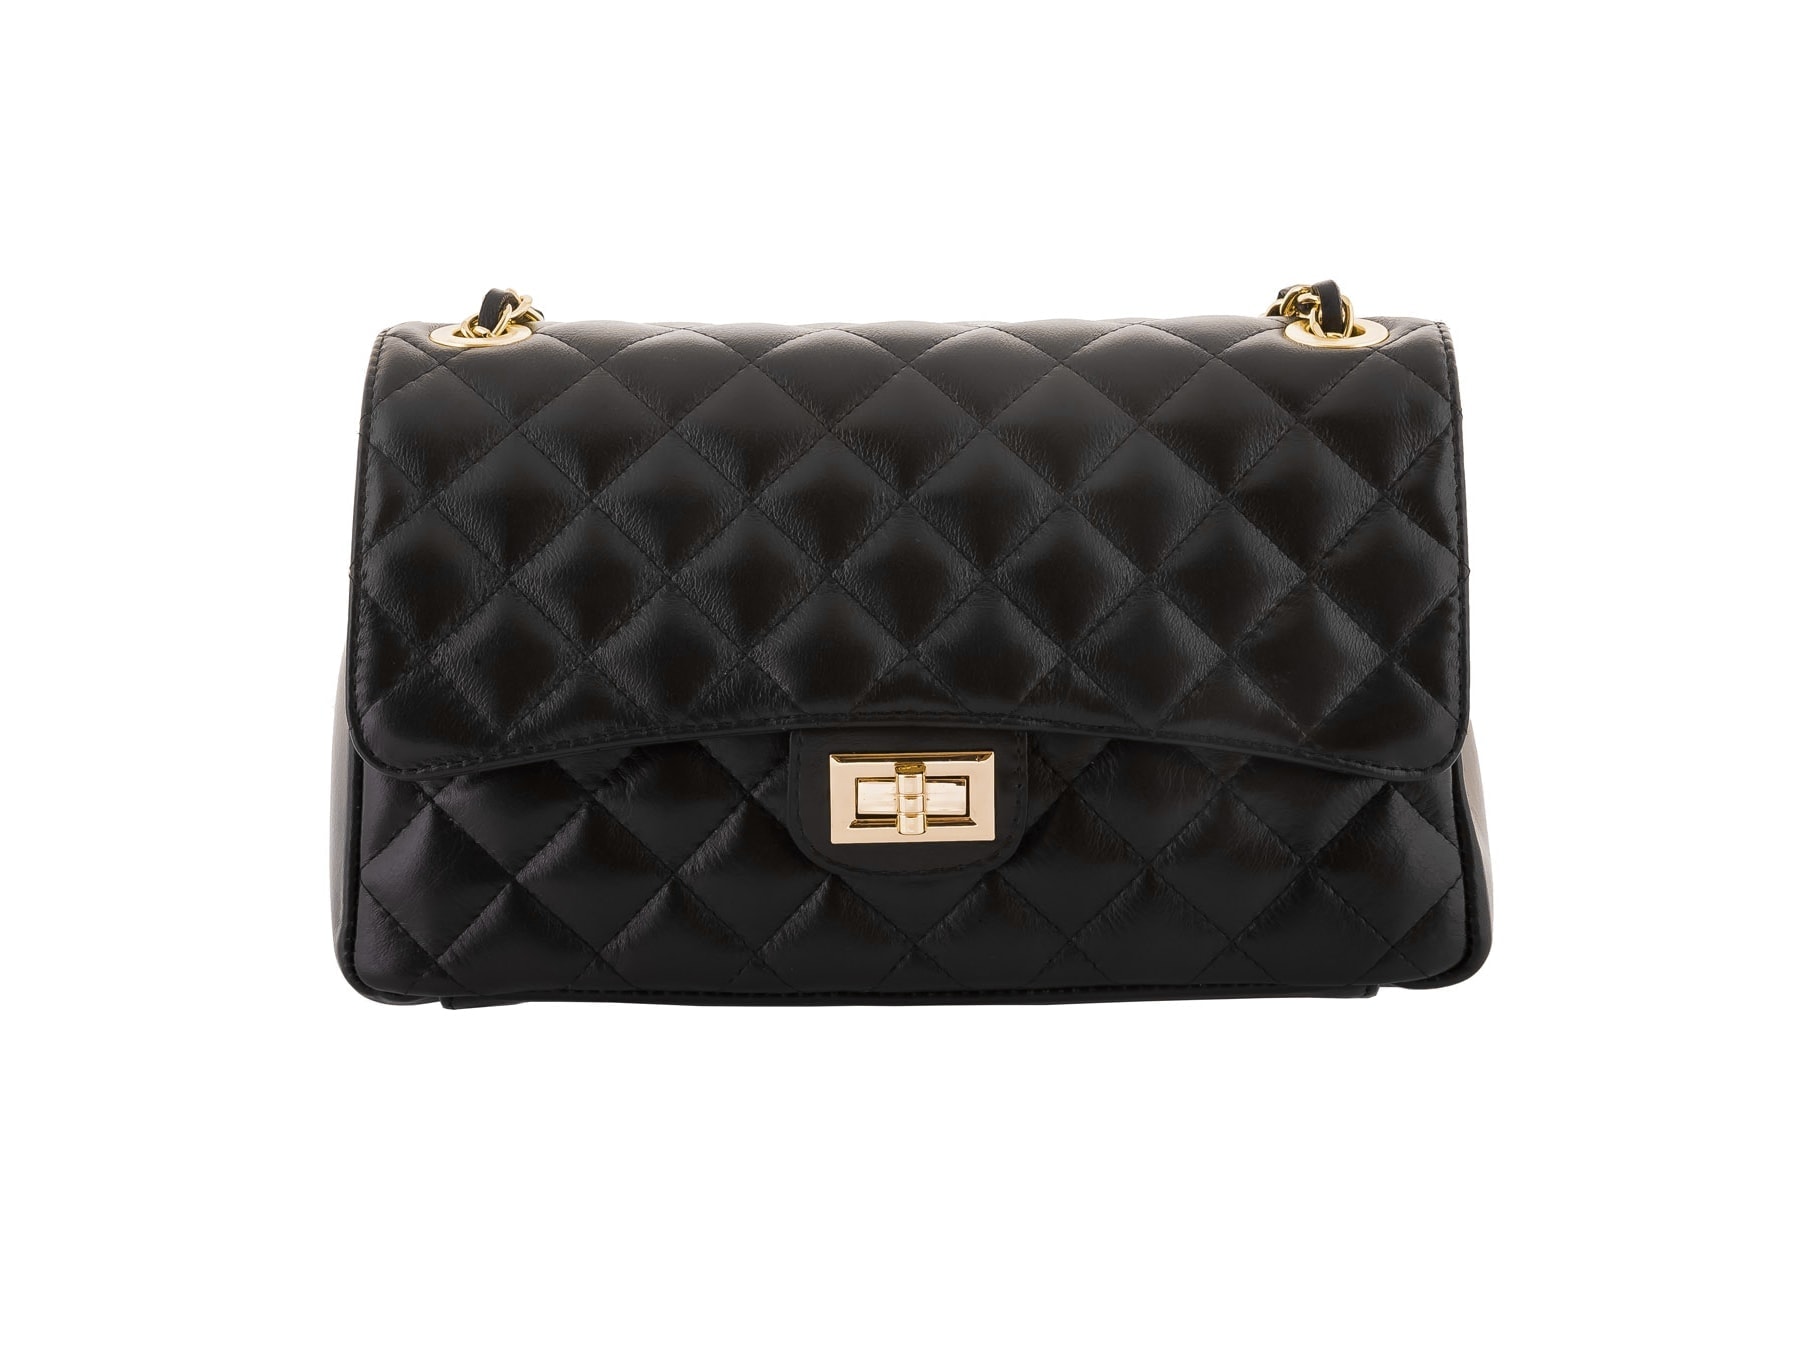 Iconic Quilted Clutch by Elsanna Portea